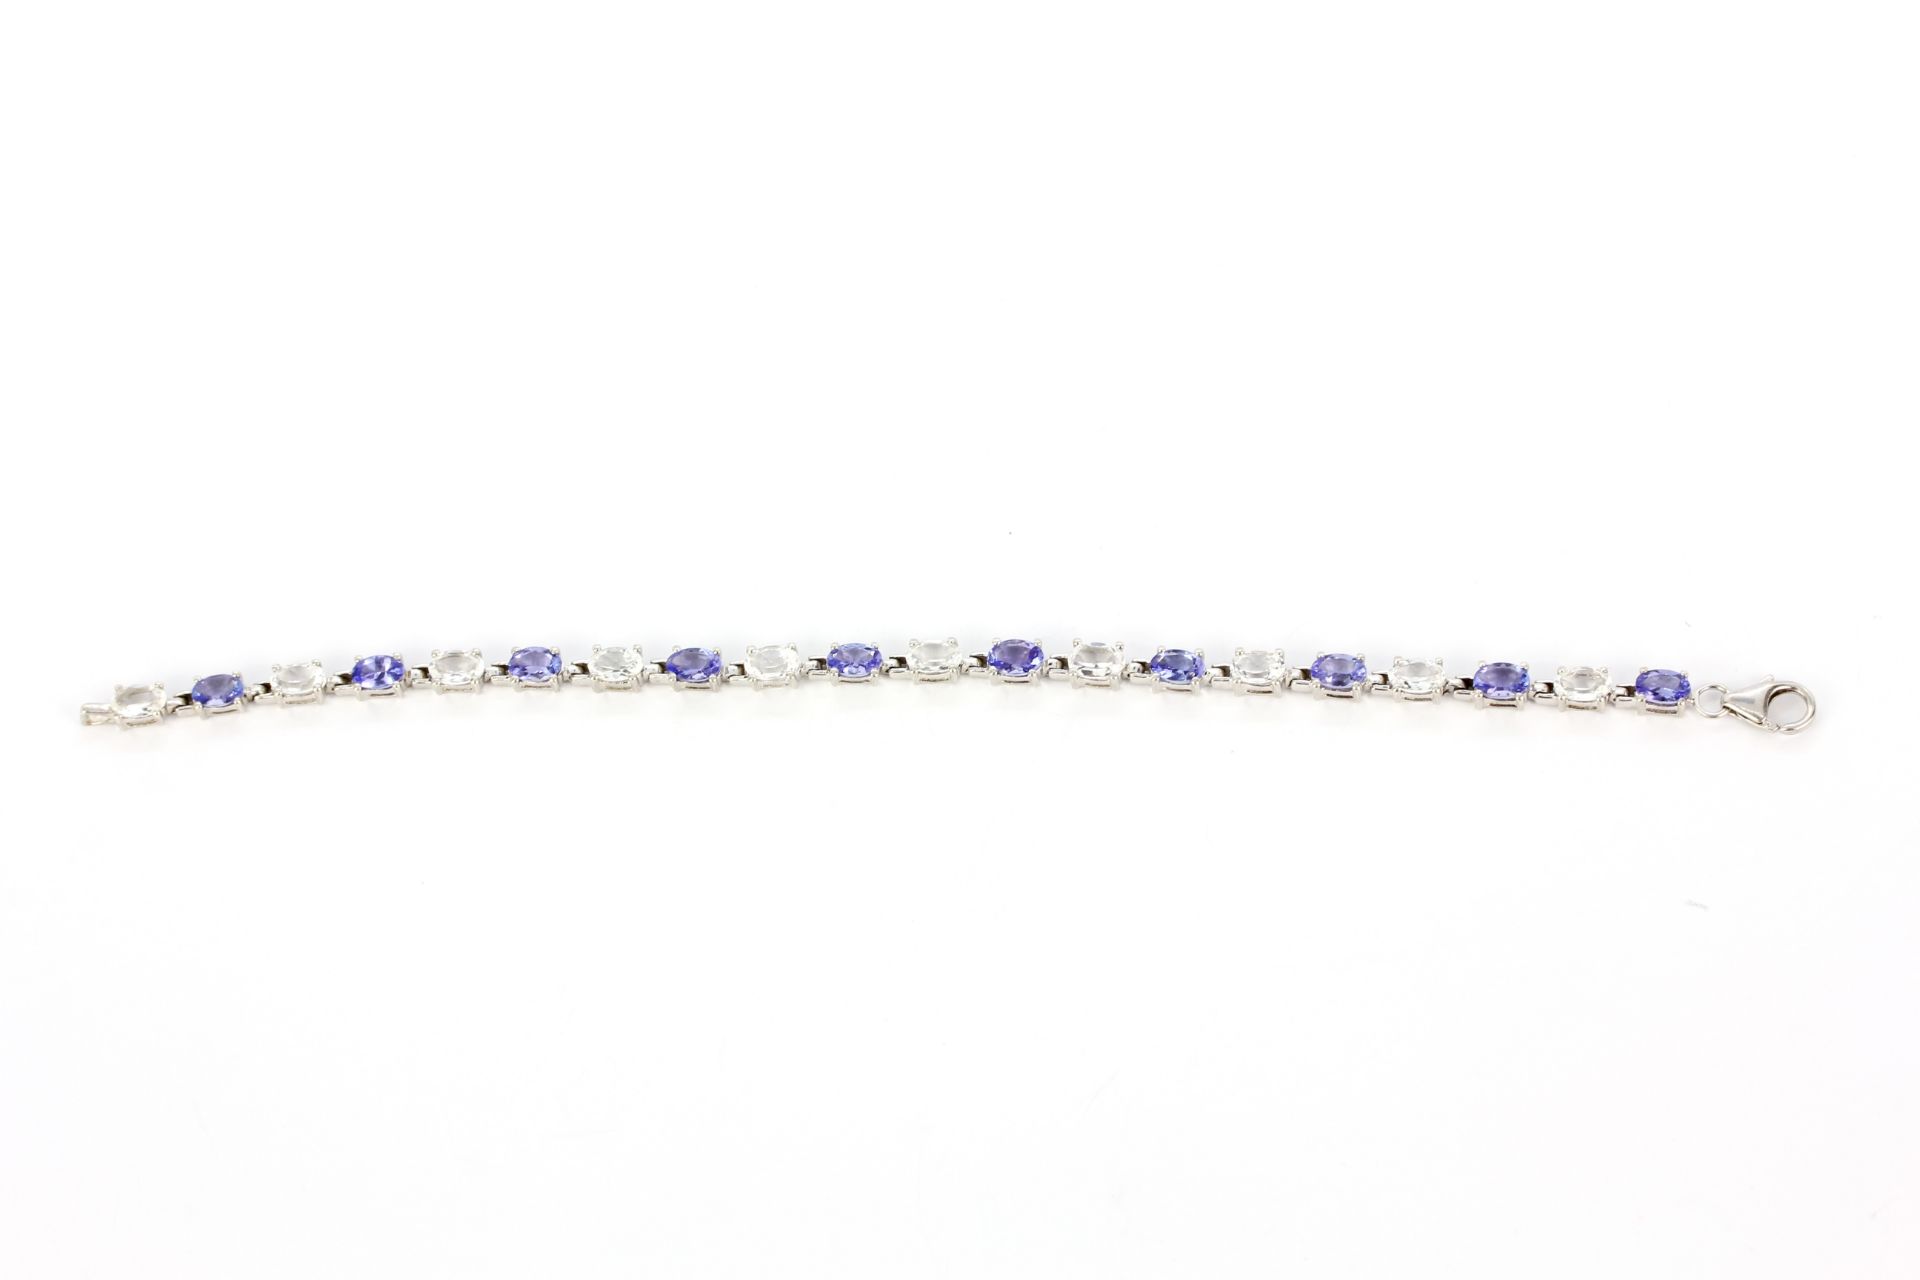 A 925 silver bracelet set with oval cut tanzanites and white topaz, L. 18.5cm. - Image 2 of 3